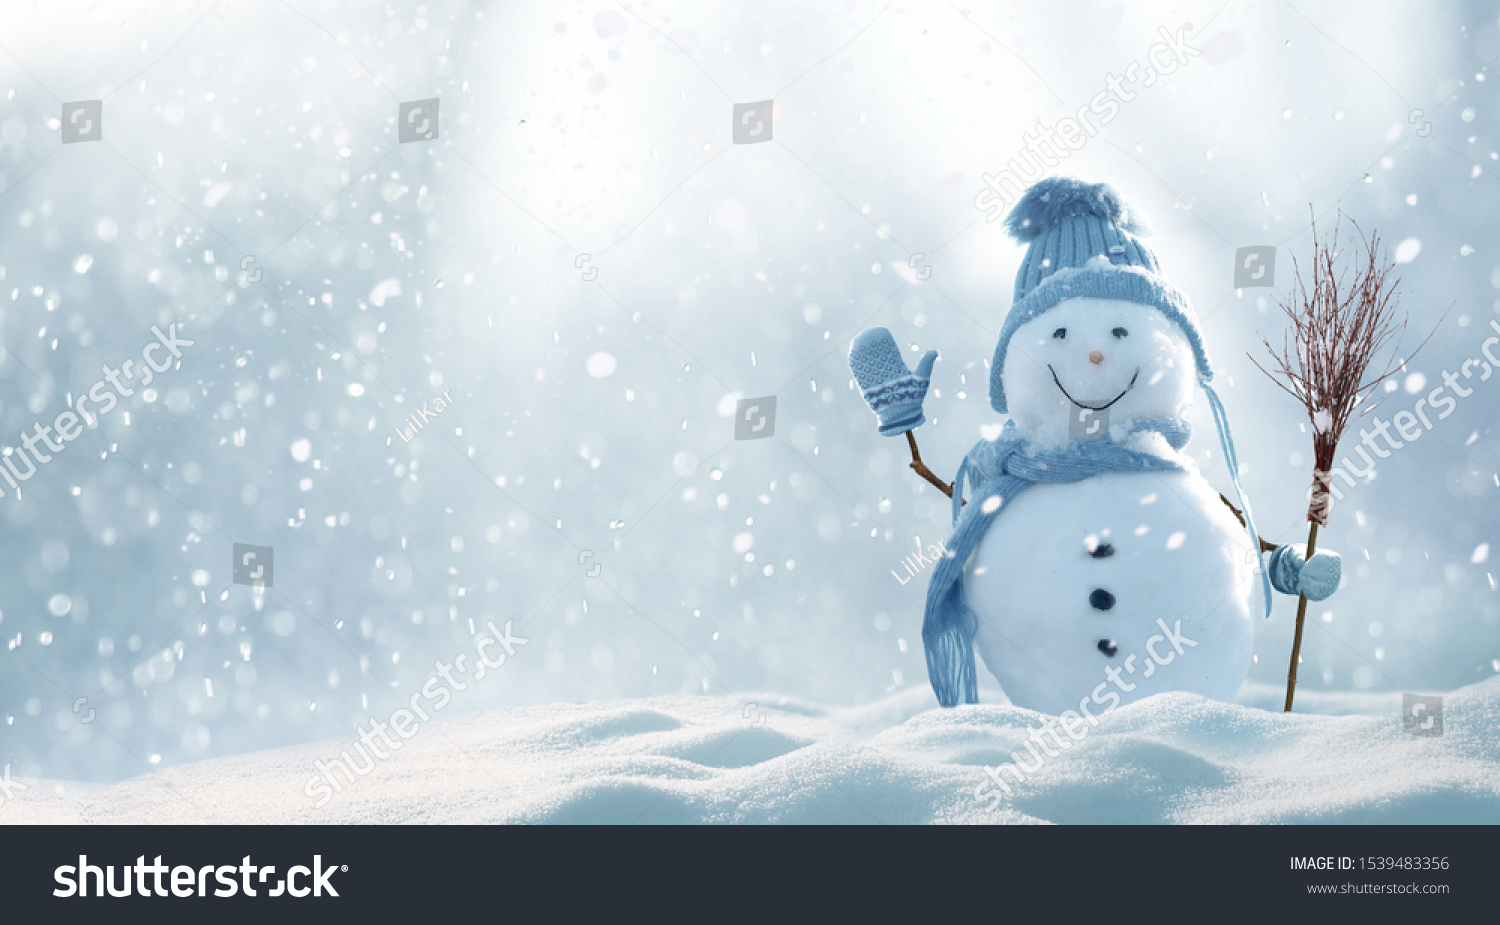 Merry christmas and happy new year greeting card with copy-space.Happy snowman standing in christmas landscape.Snow background.Winter fairytale. #1539483356